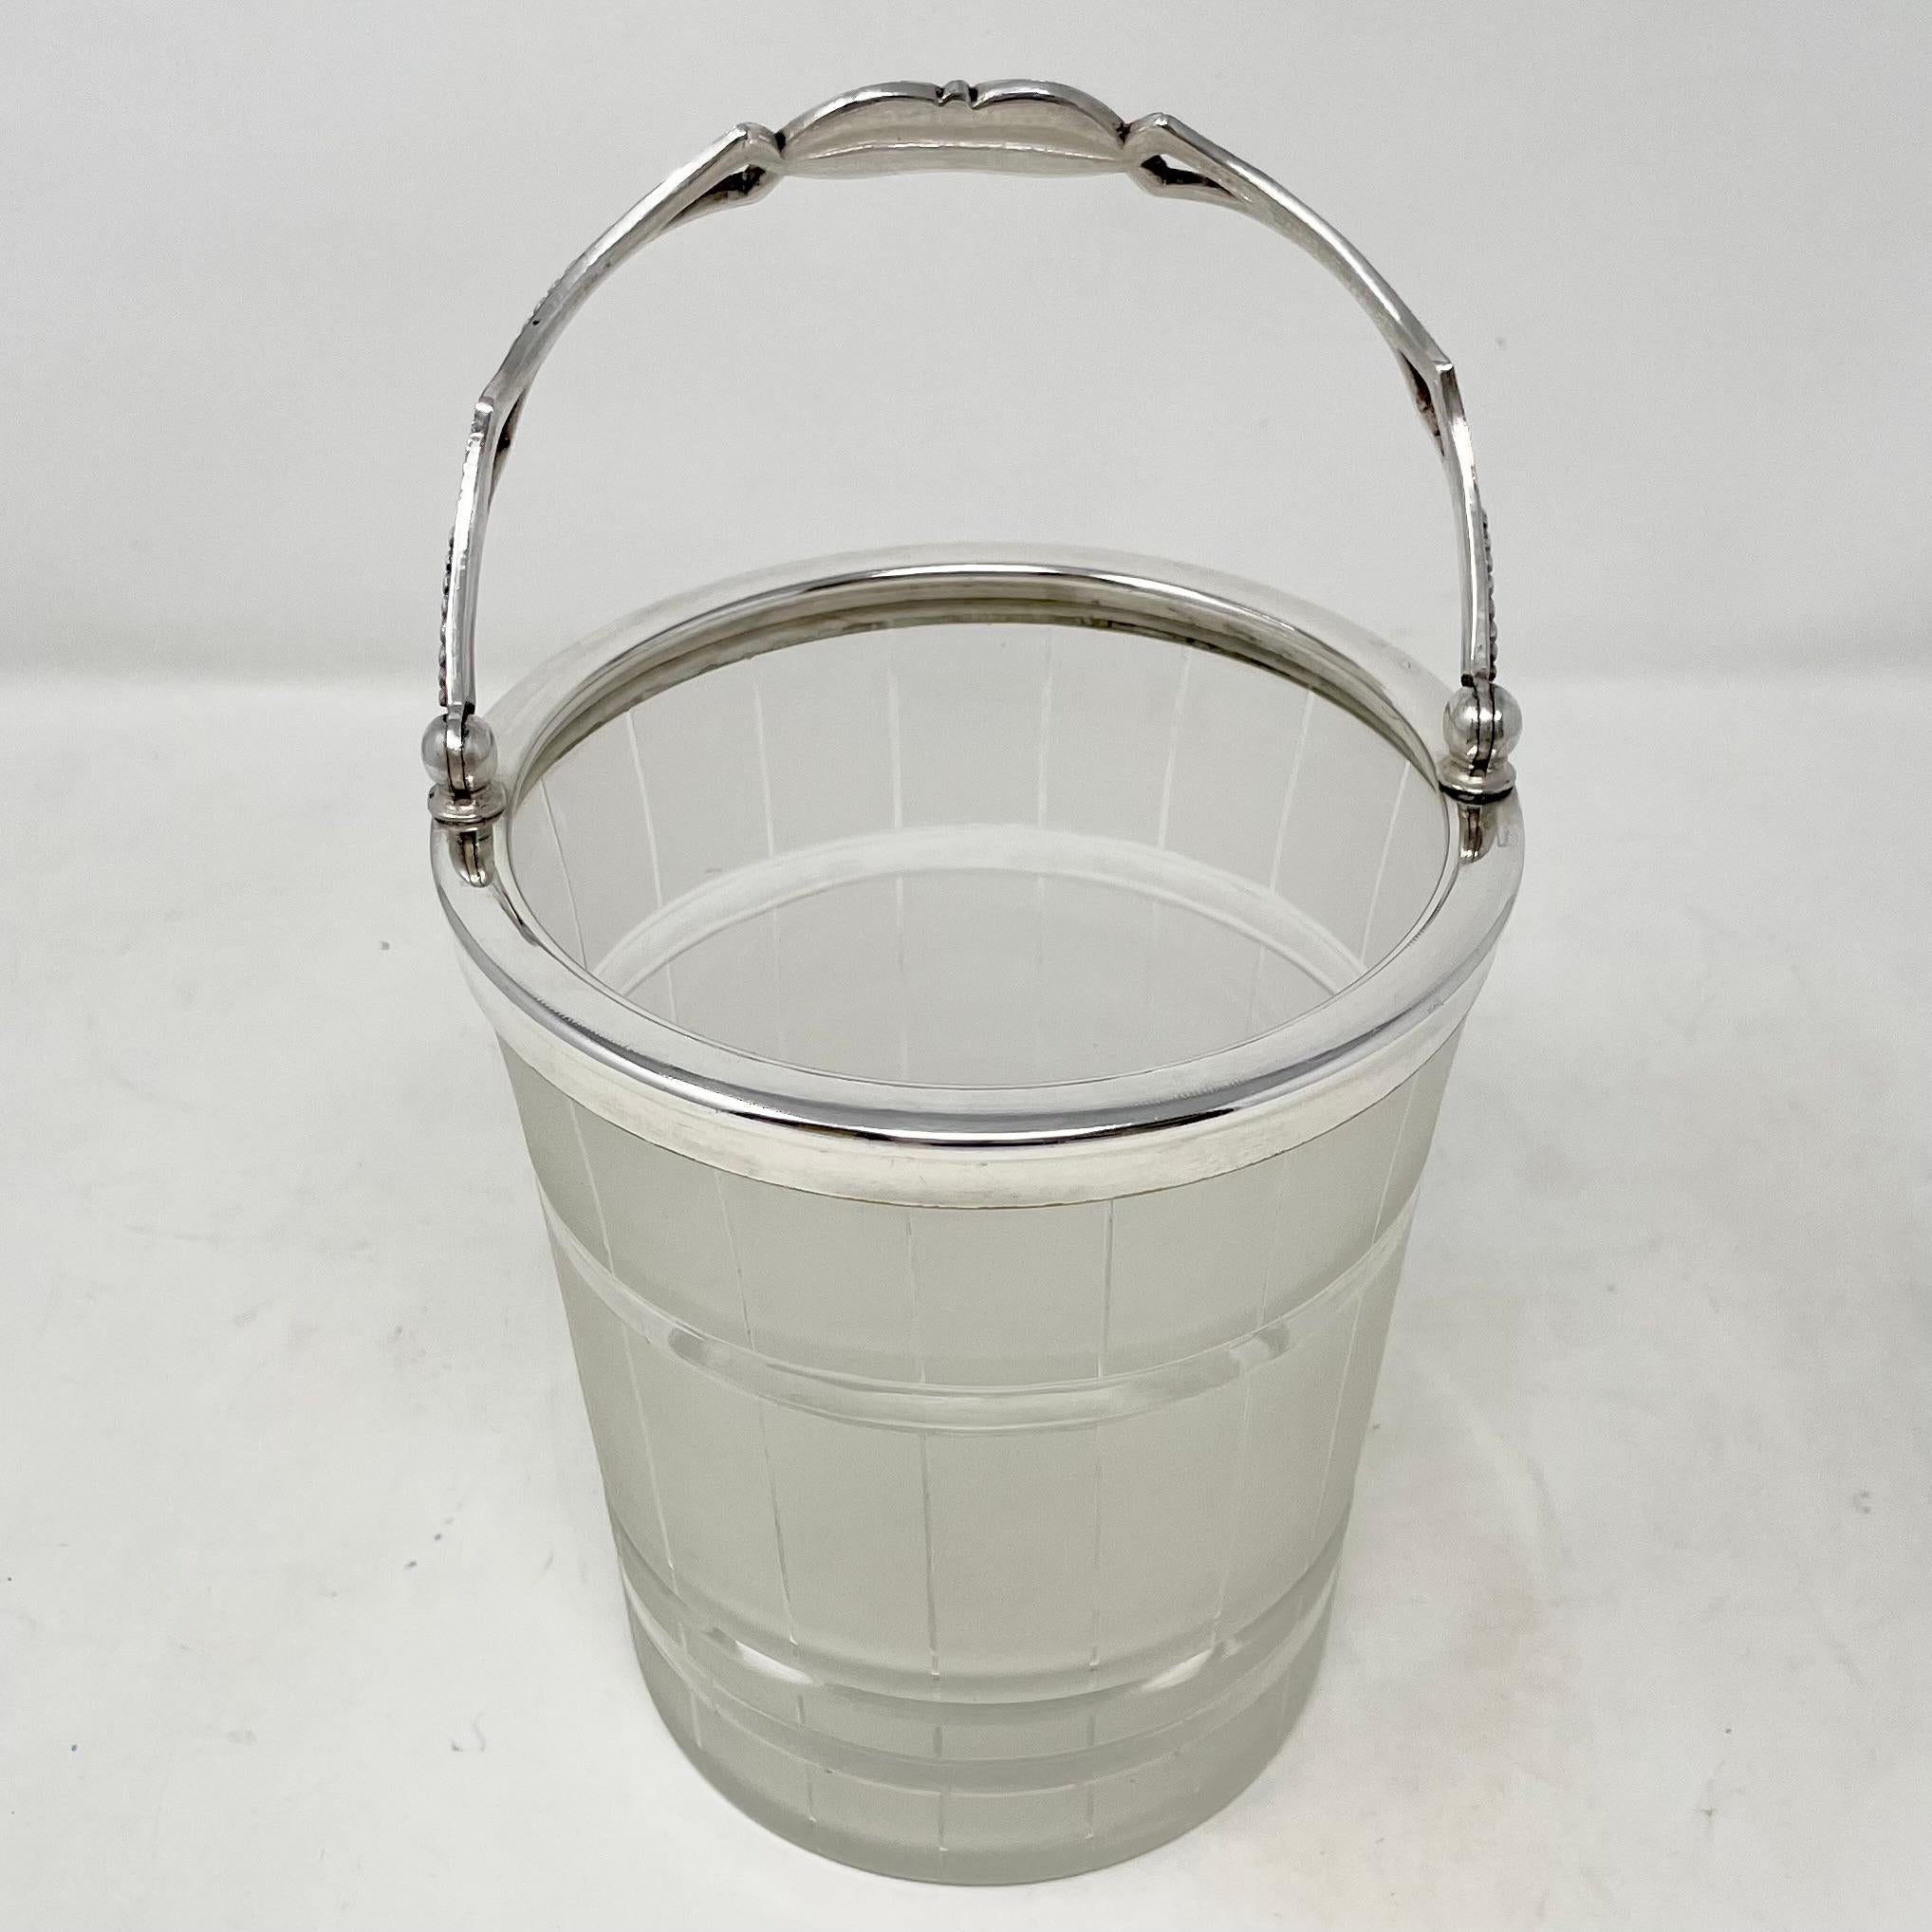 Small Antique English Art Deco Silver-Plate & Frosted Glass Ice Bucket, Circa 1920-1930.